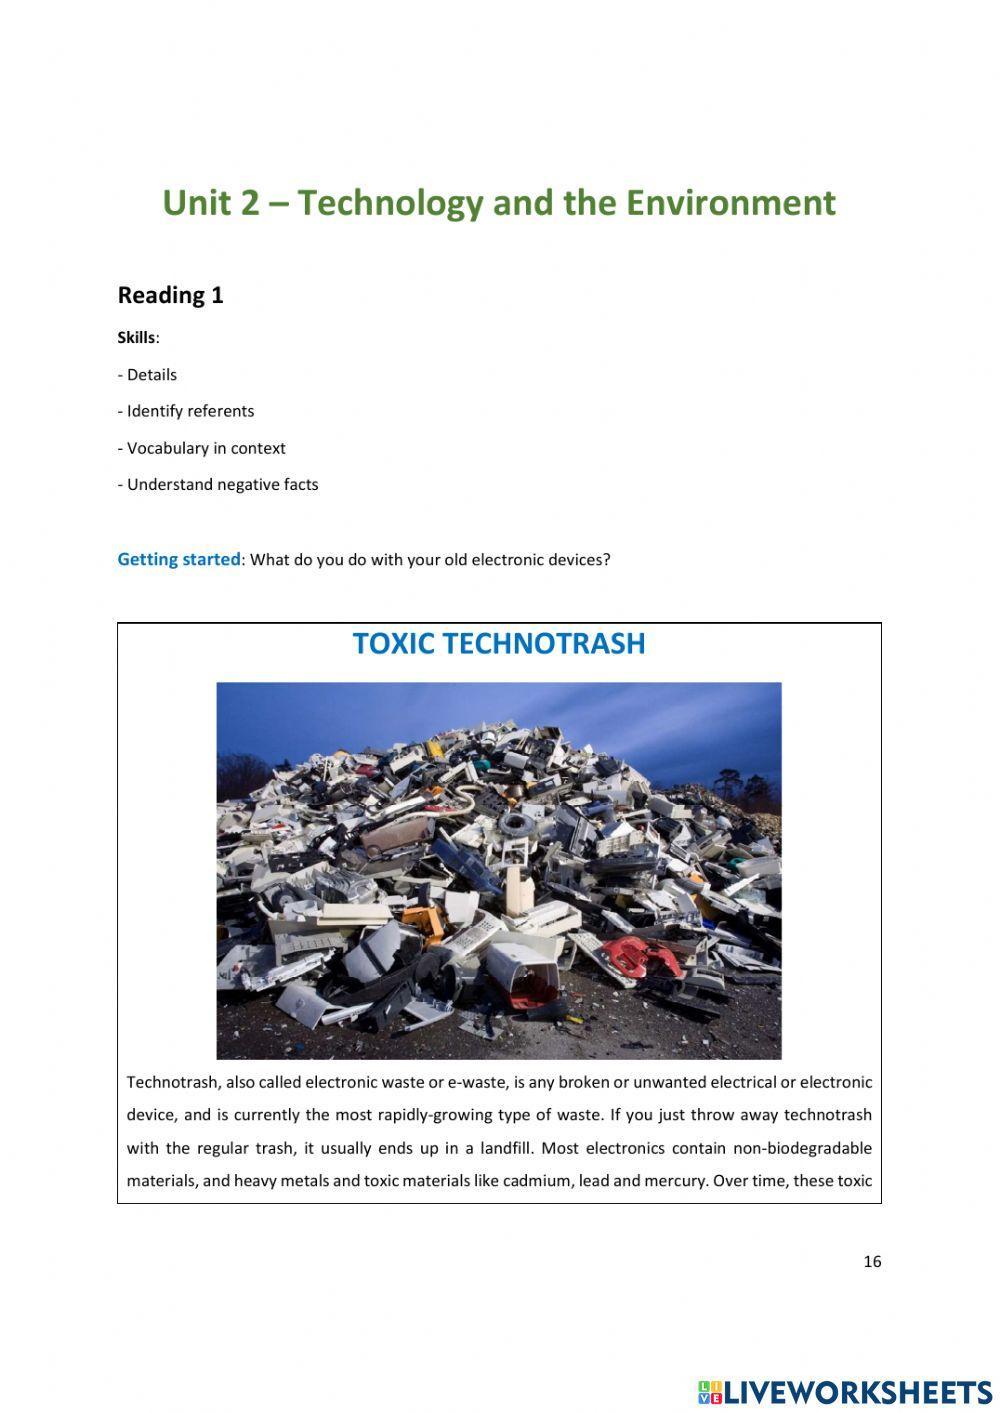 Technology and the environment